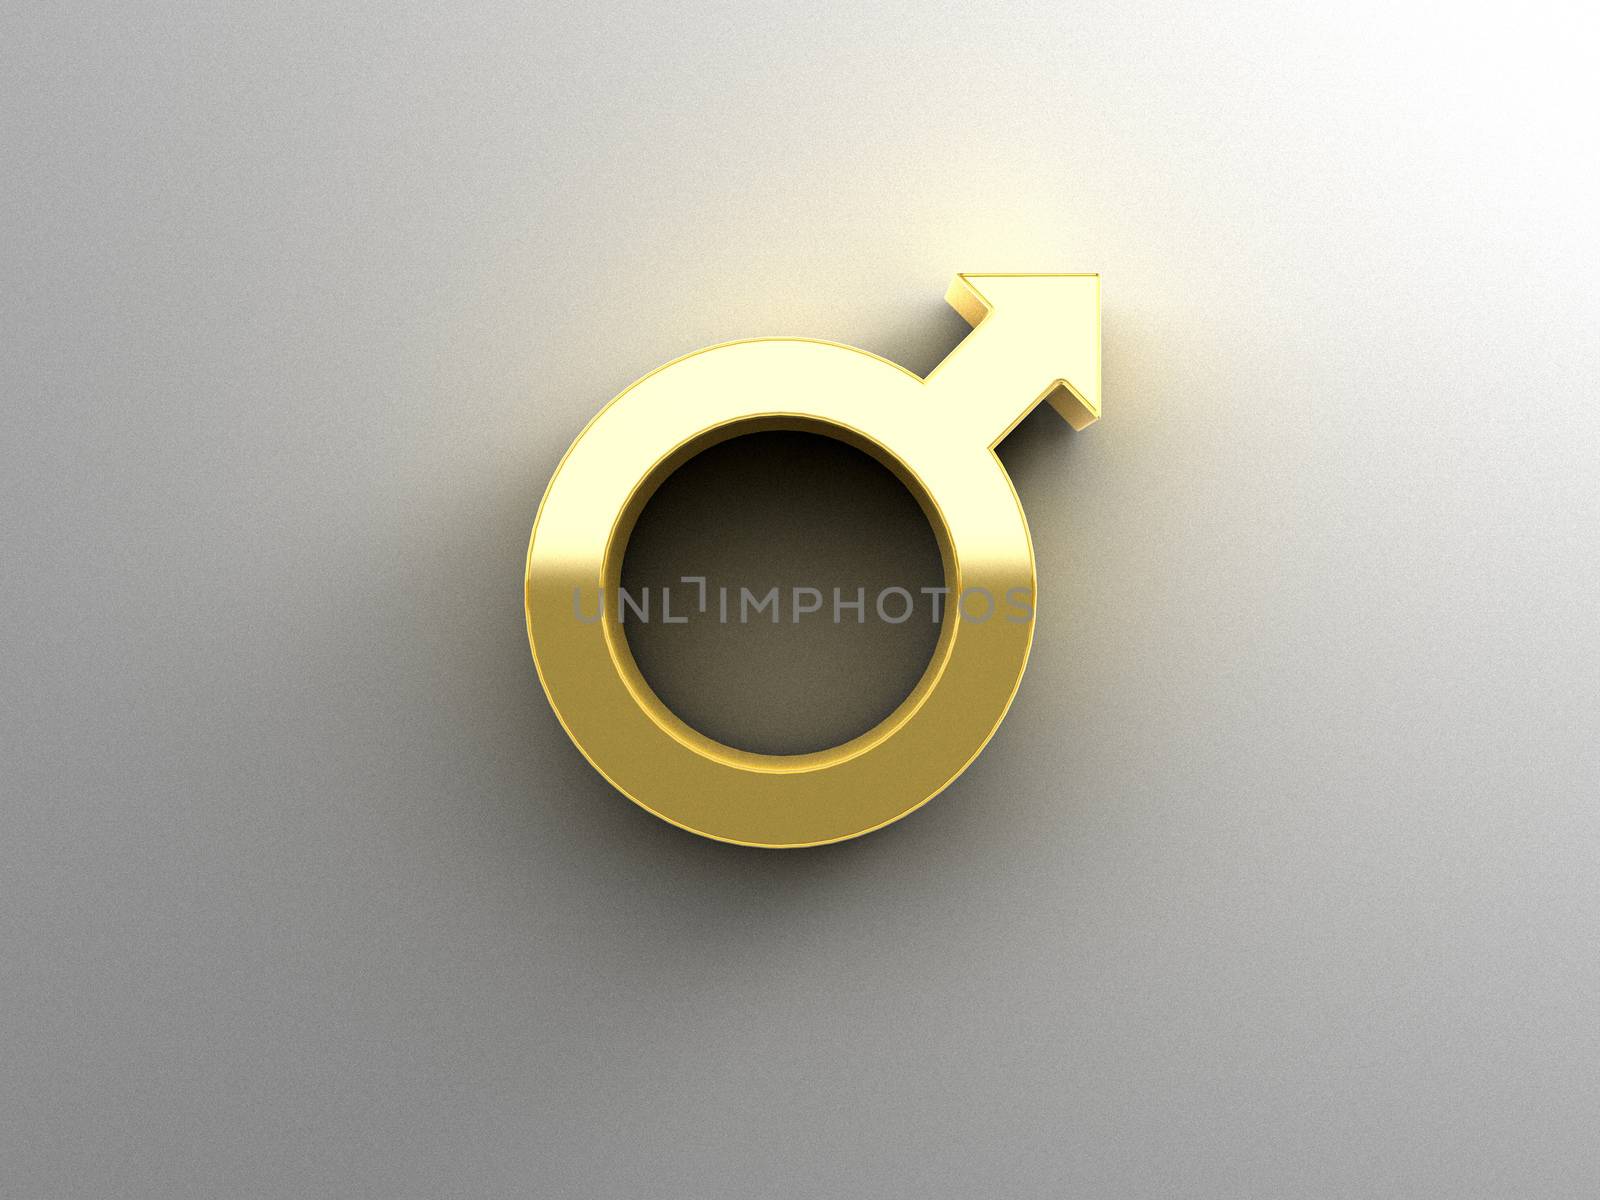 Male sex signs - gold 3D quality render on the wall background with soft shadow.